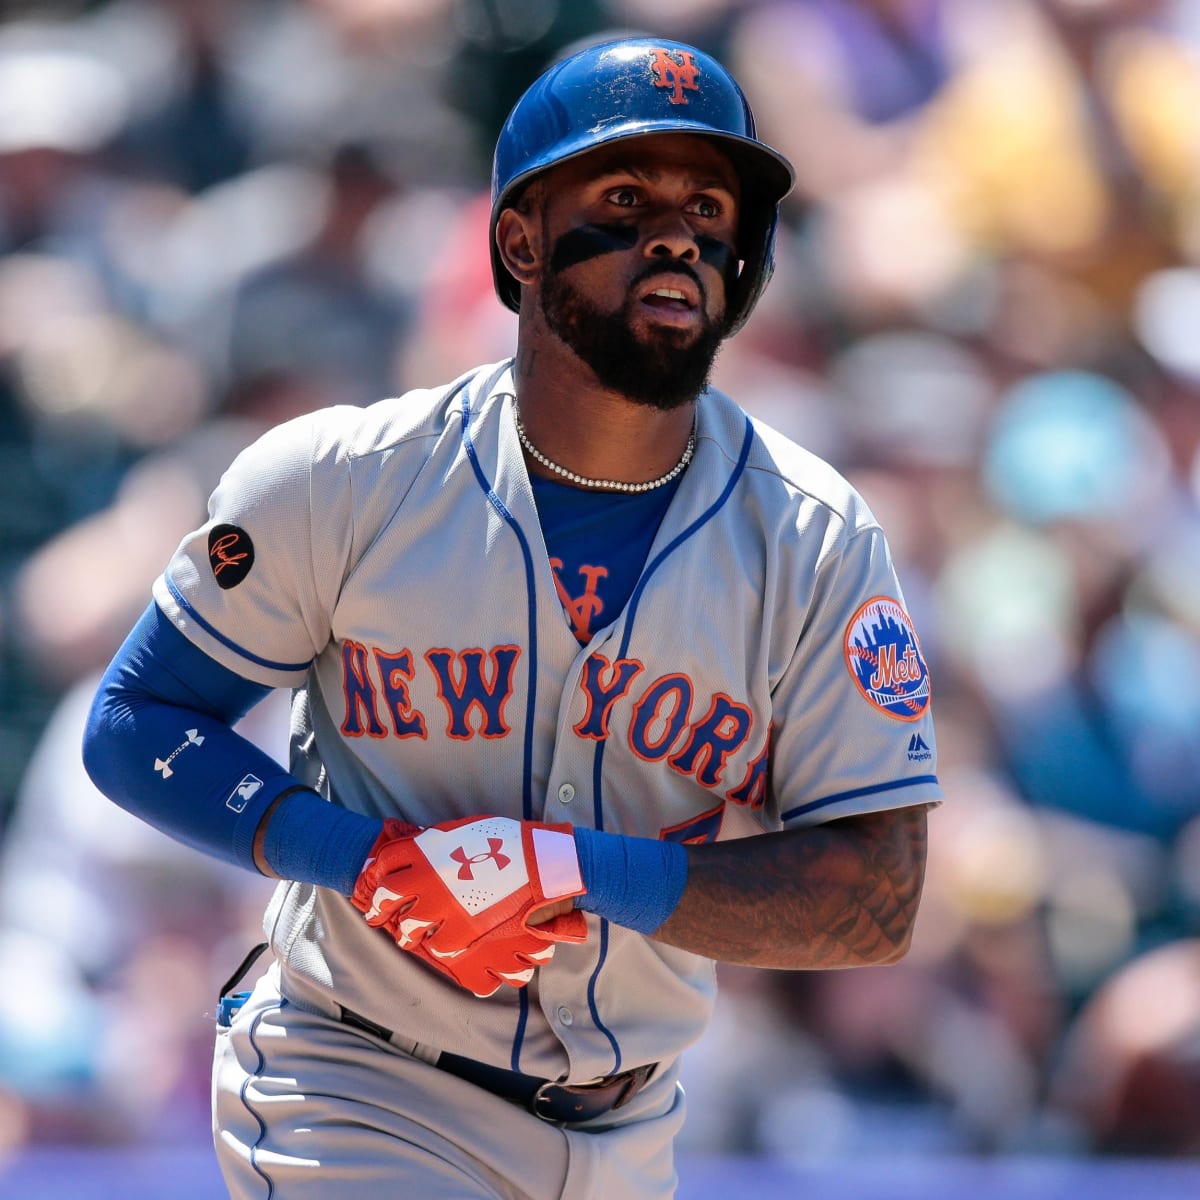 Mets expected to pick up 2017 option for Jose Reyes - NBC Sports